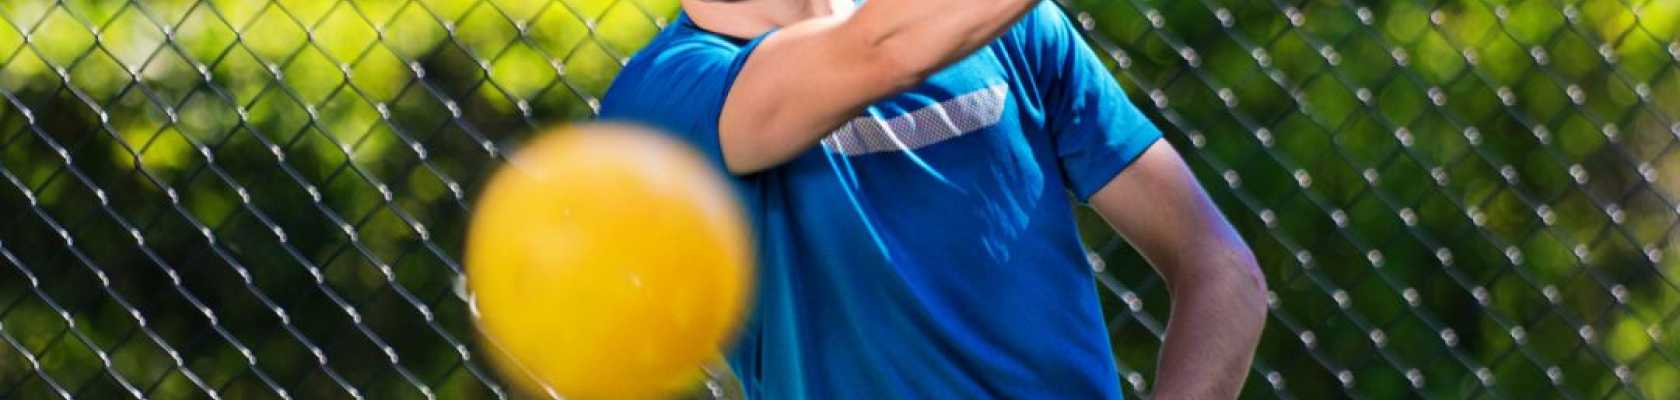 Images of someone playing on a pickleball court